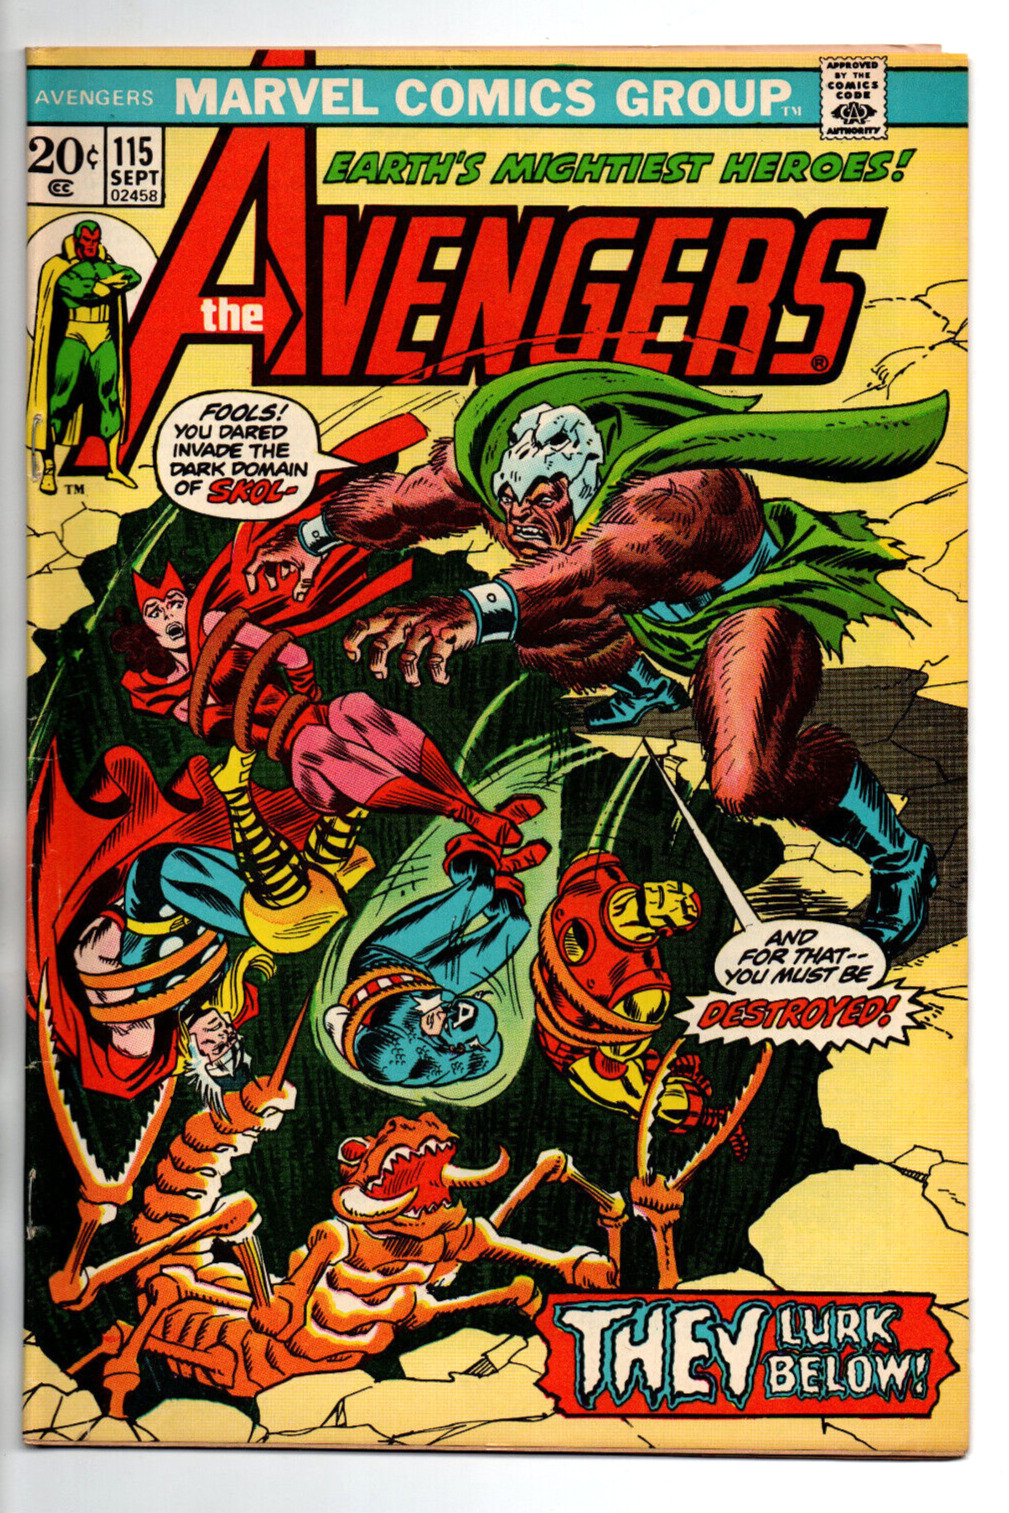 Avengers #115 - Scarlet Witch - Captain America - Iron Man - 1973 - FN